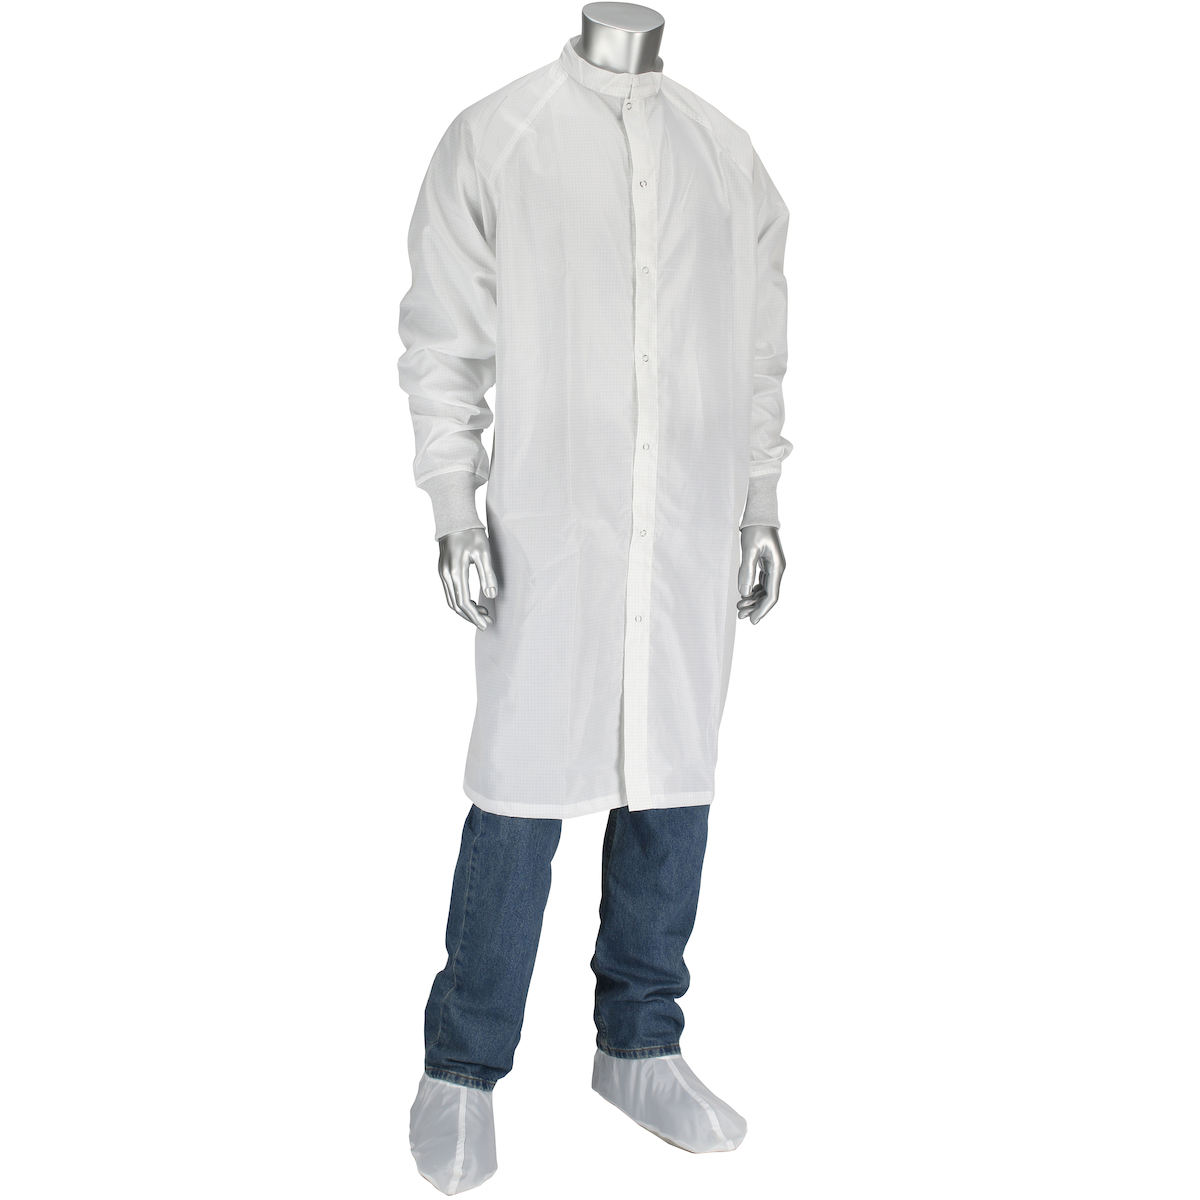 CFRC-74WH-5PK  Uniform Technology™ Altessa Grid ISO 5 (Class 100) Cleanroom Frocks - white